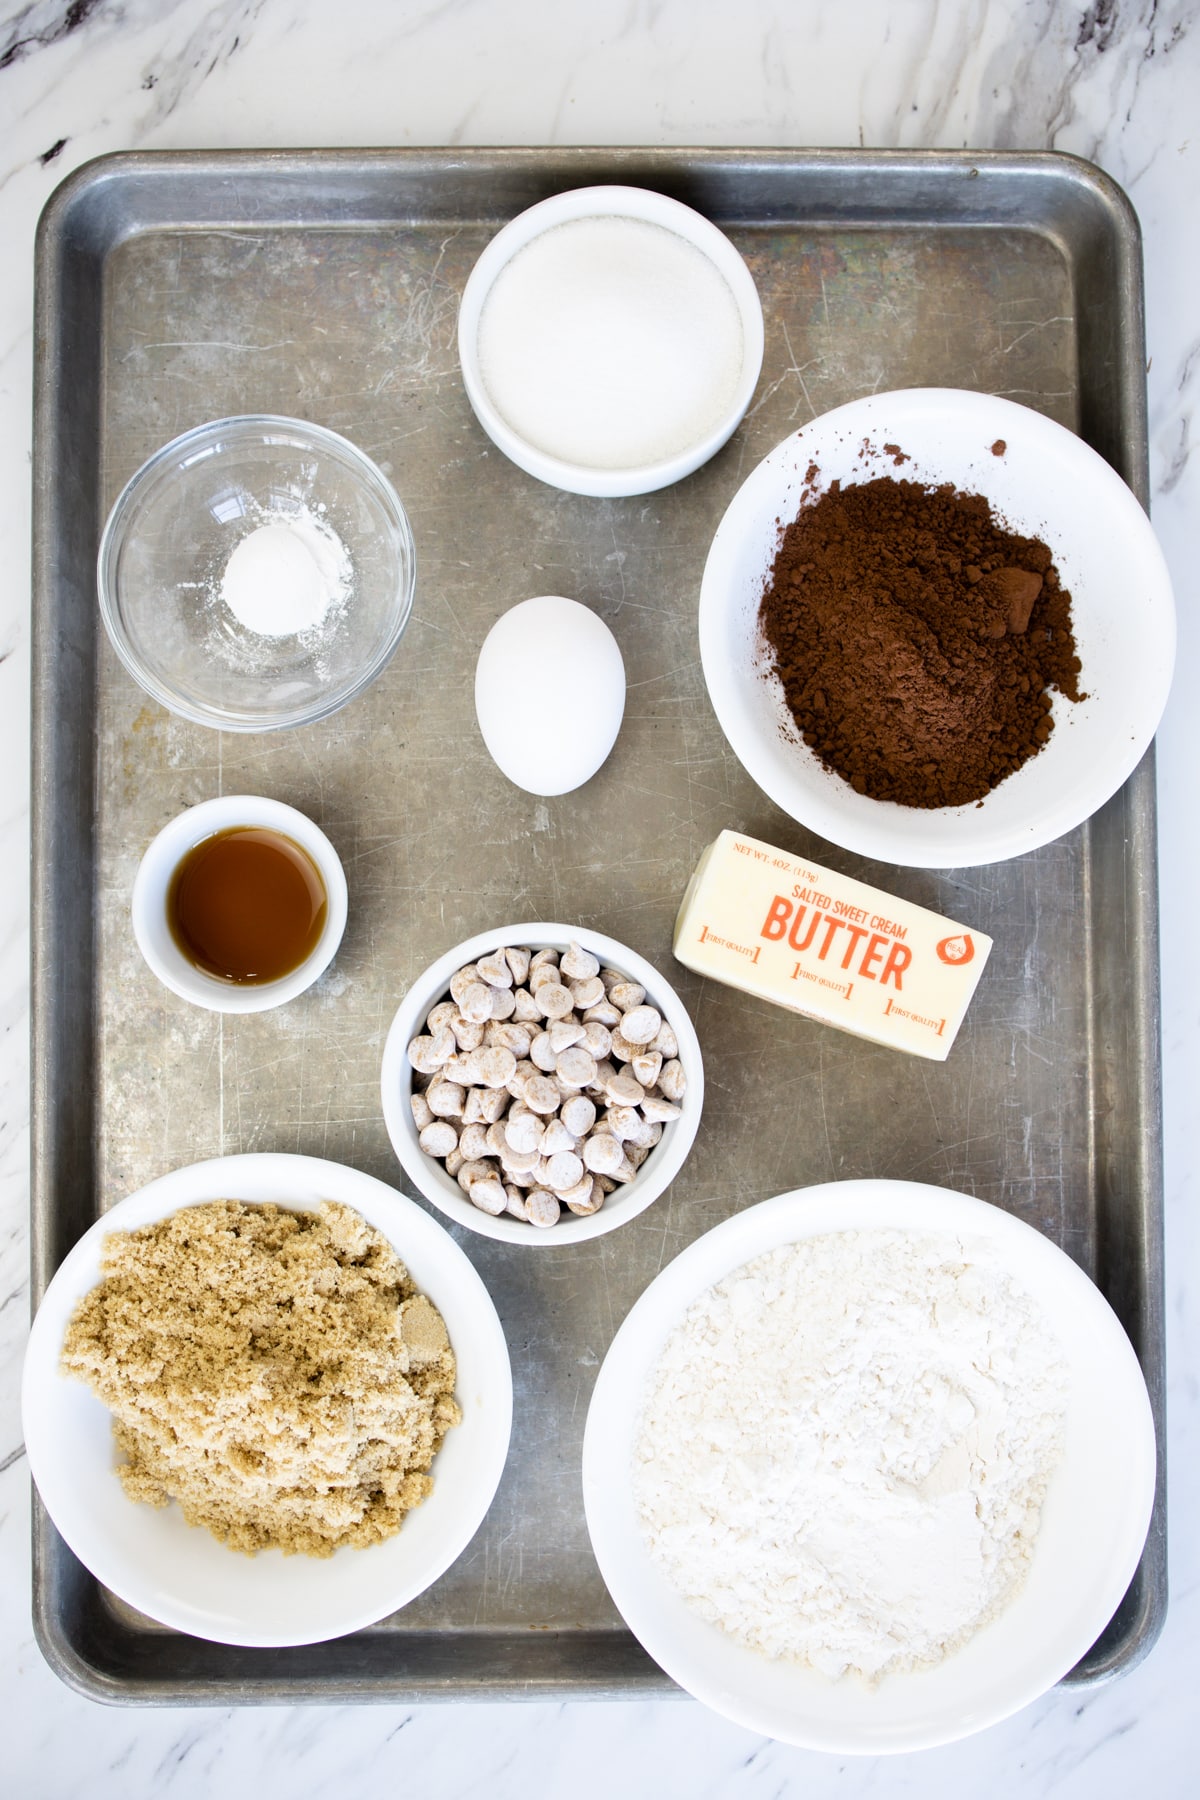 Top view of ingredients needed to make Chocolate Peanut Butter Cookies in small bowls on a bsking tray.